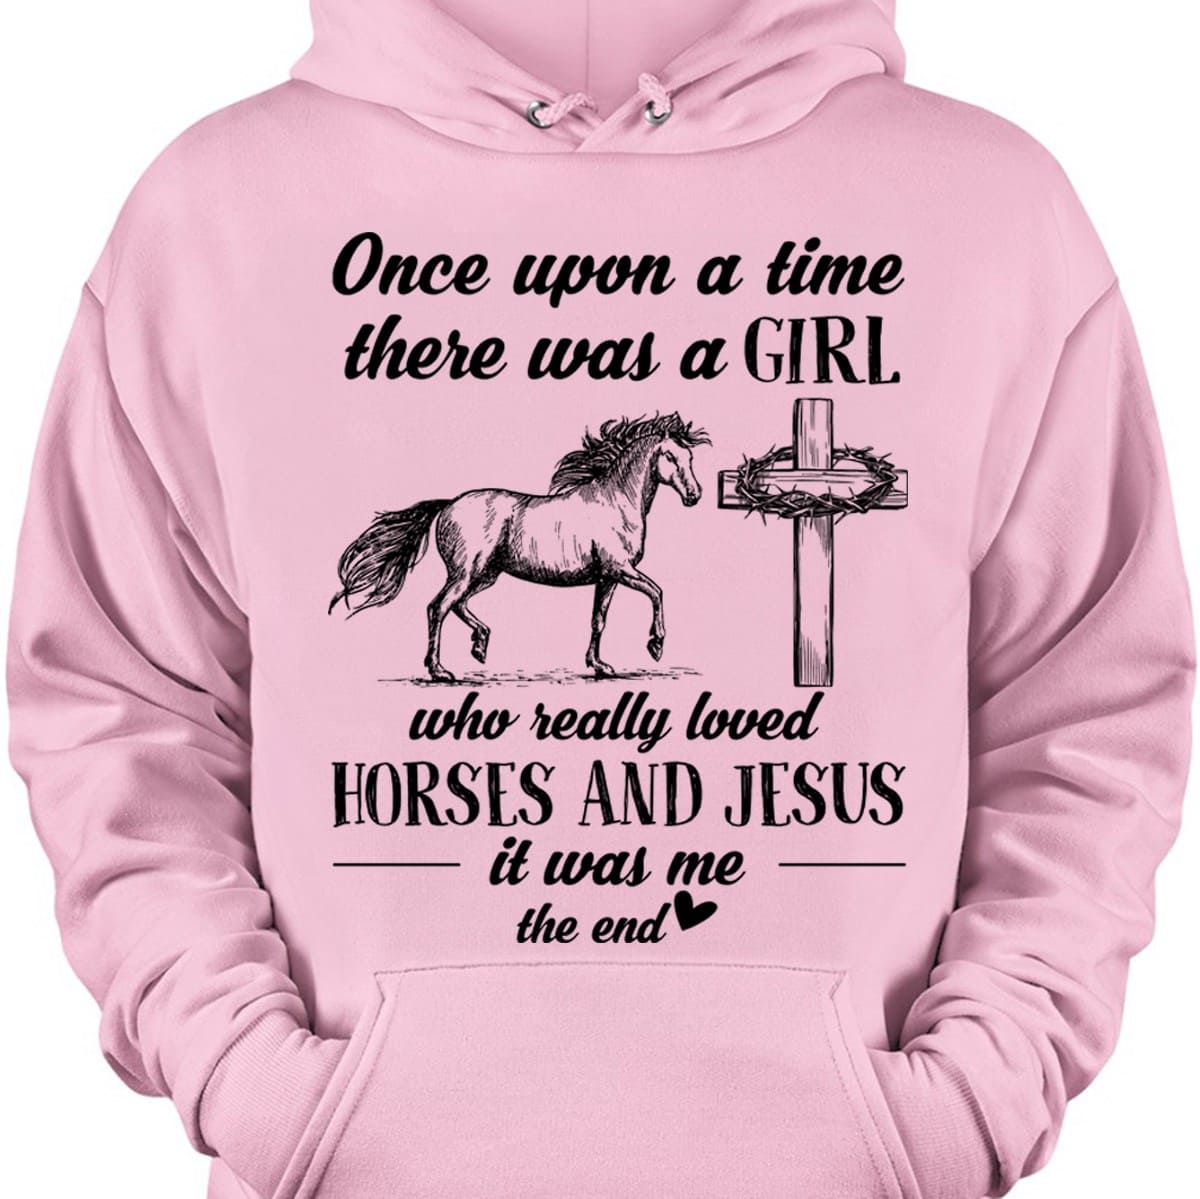 Horse God's Cross - Once upon a time there was a girl who really loved horses and jesus it was me the end